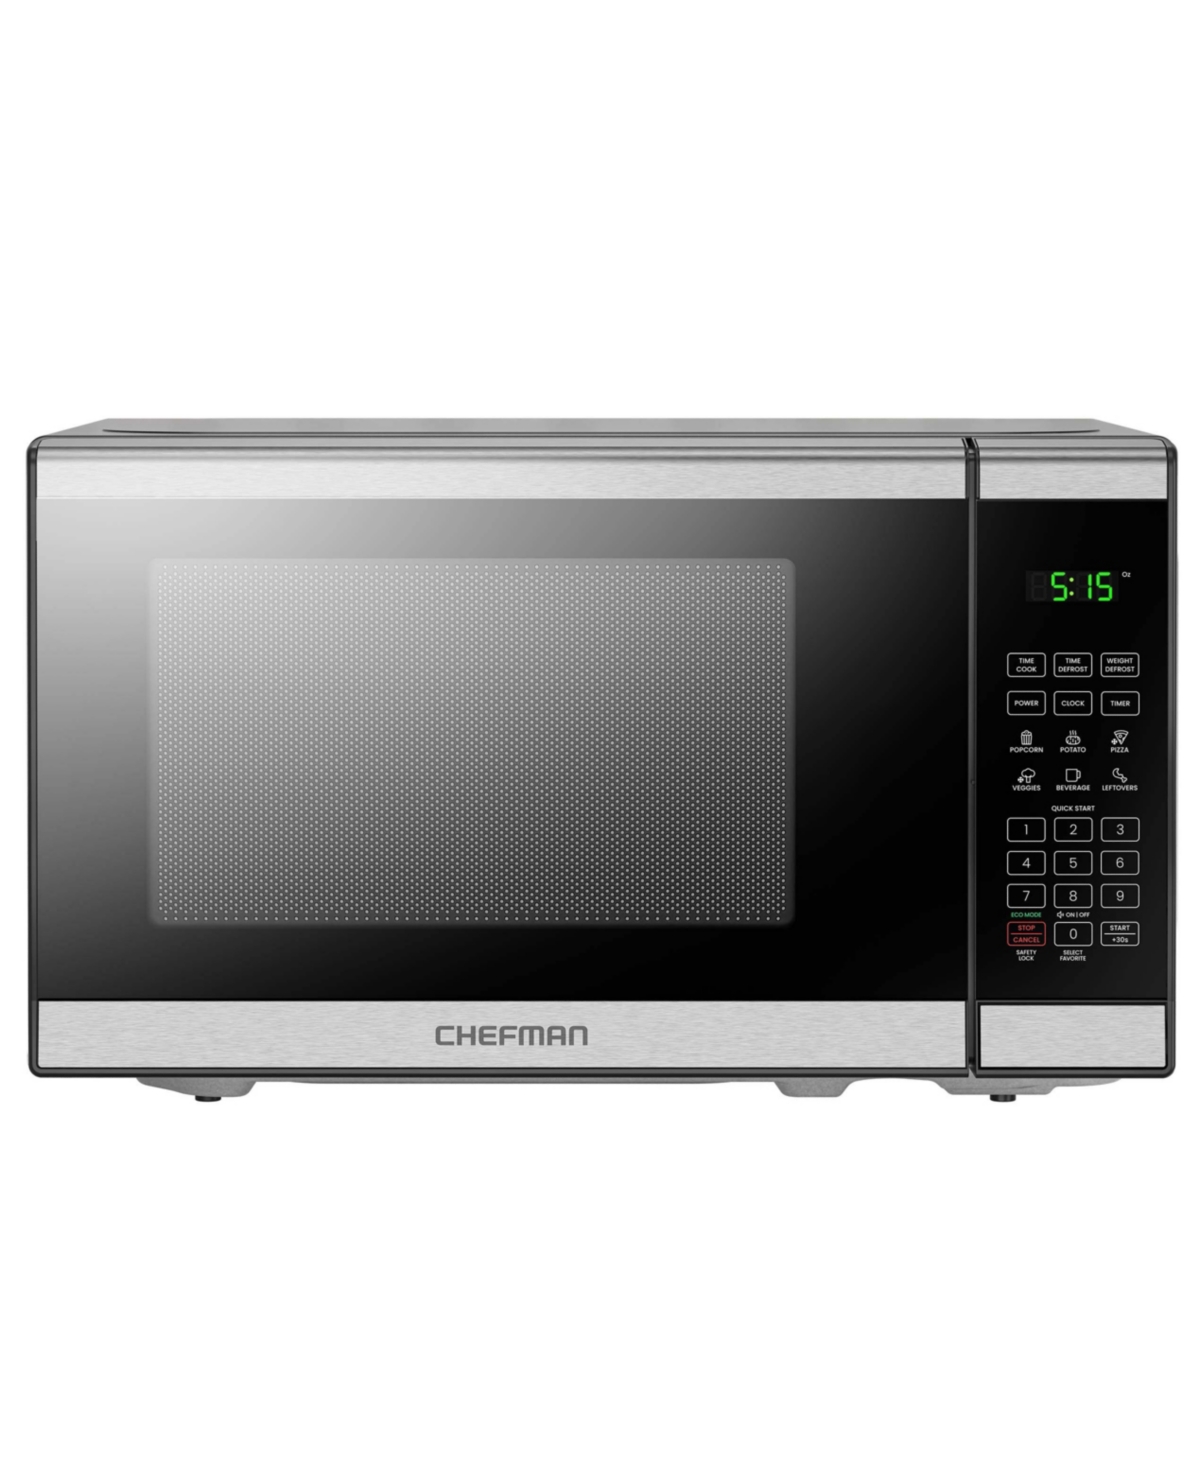 Chefman 7 Cubic Feet Microwave In Stainless